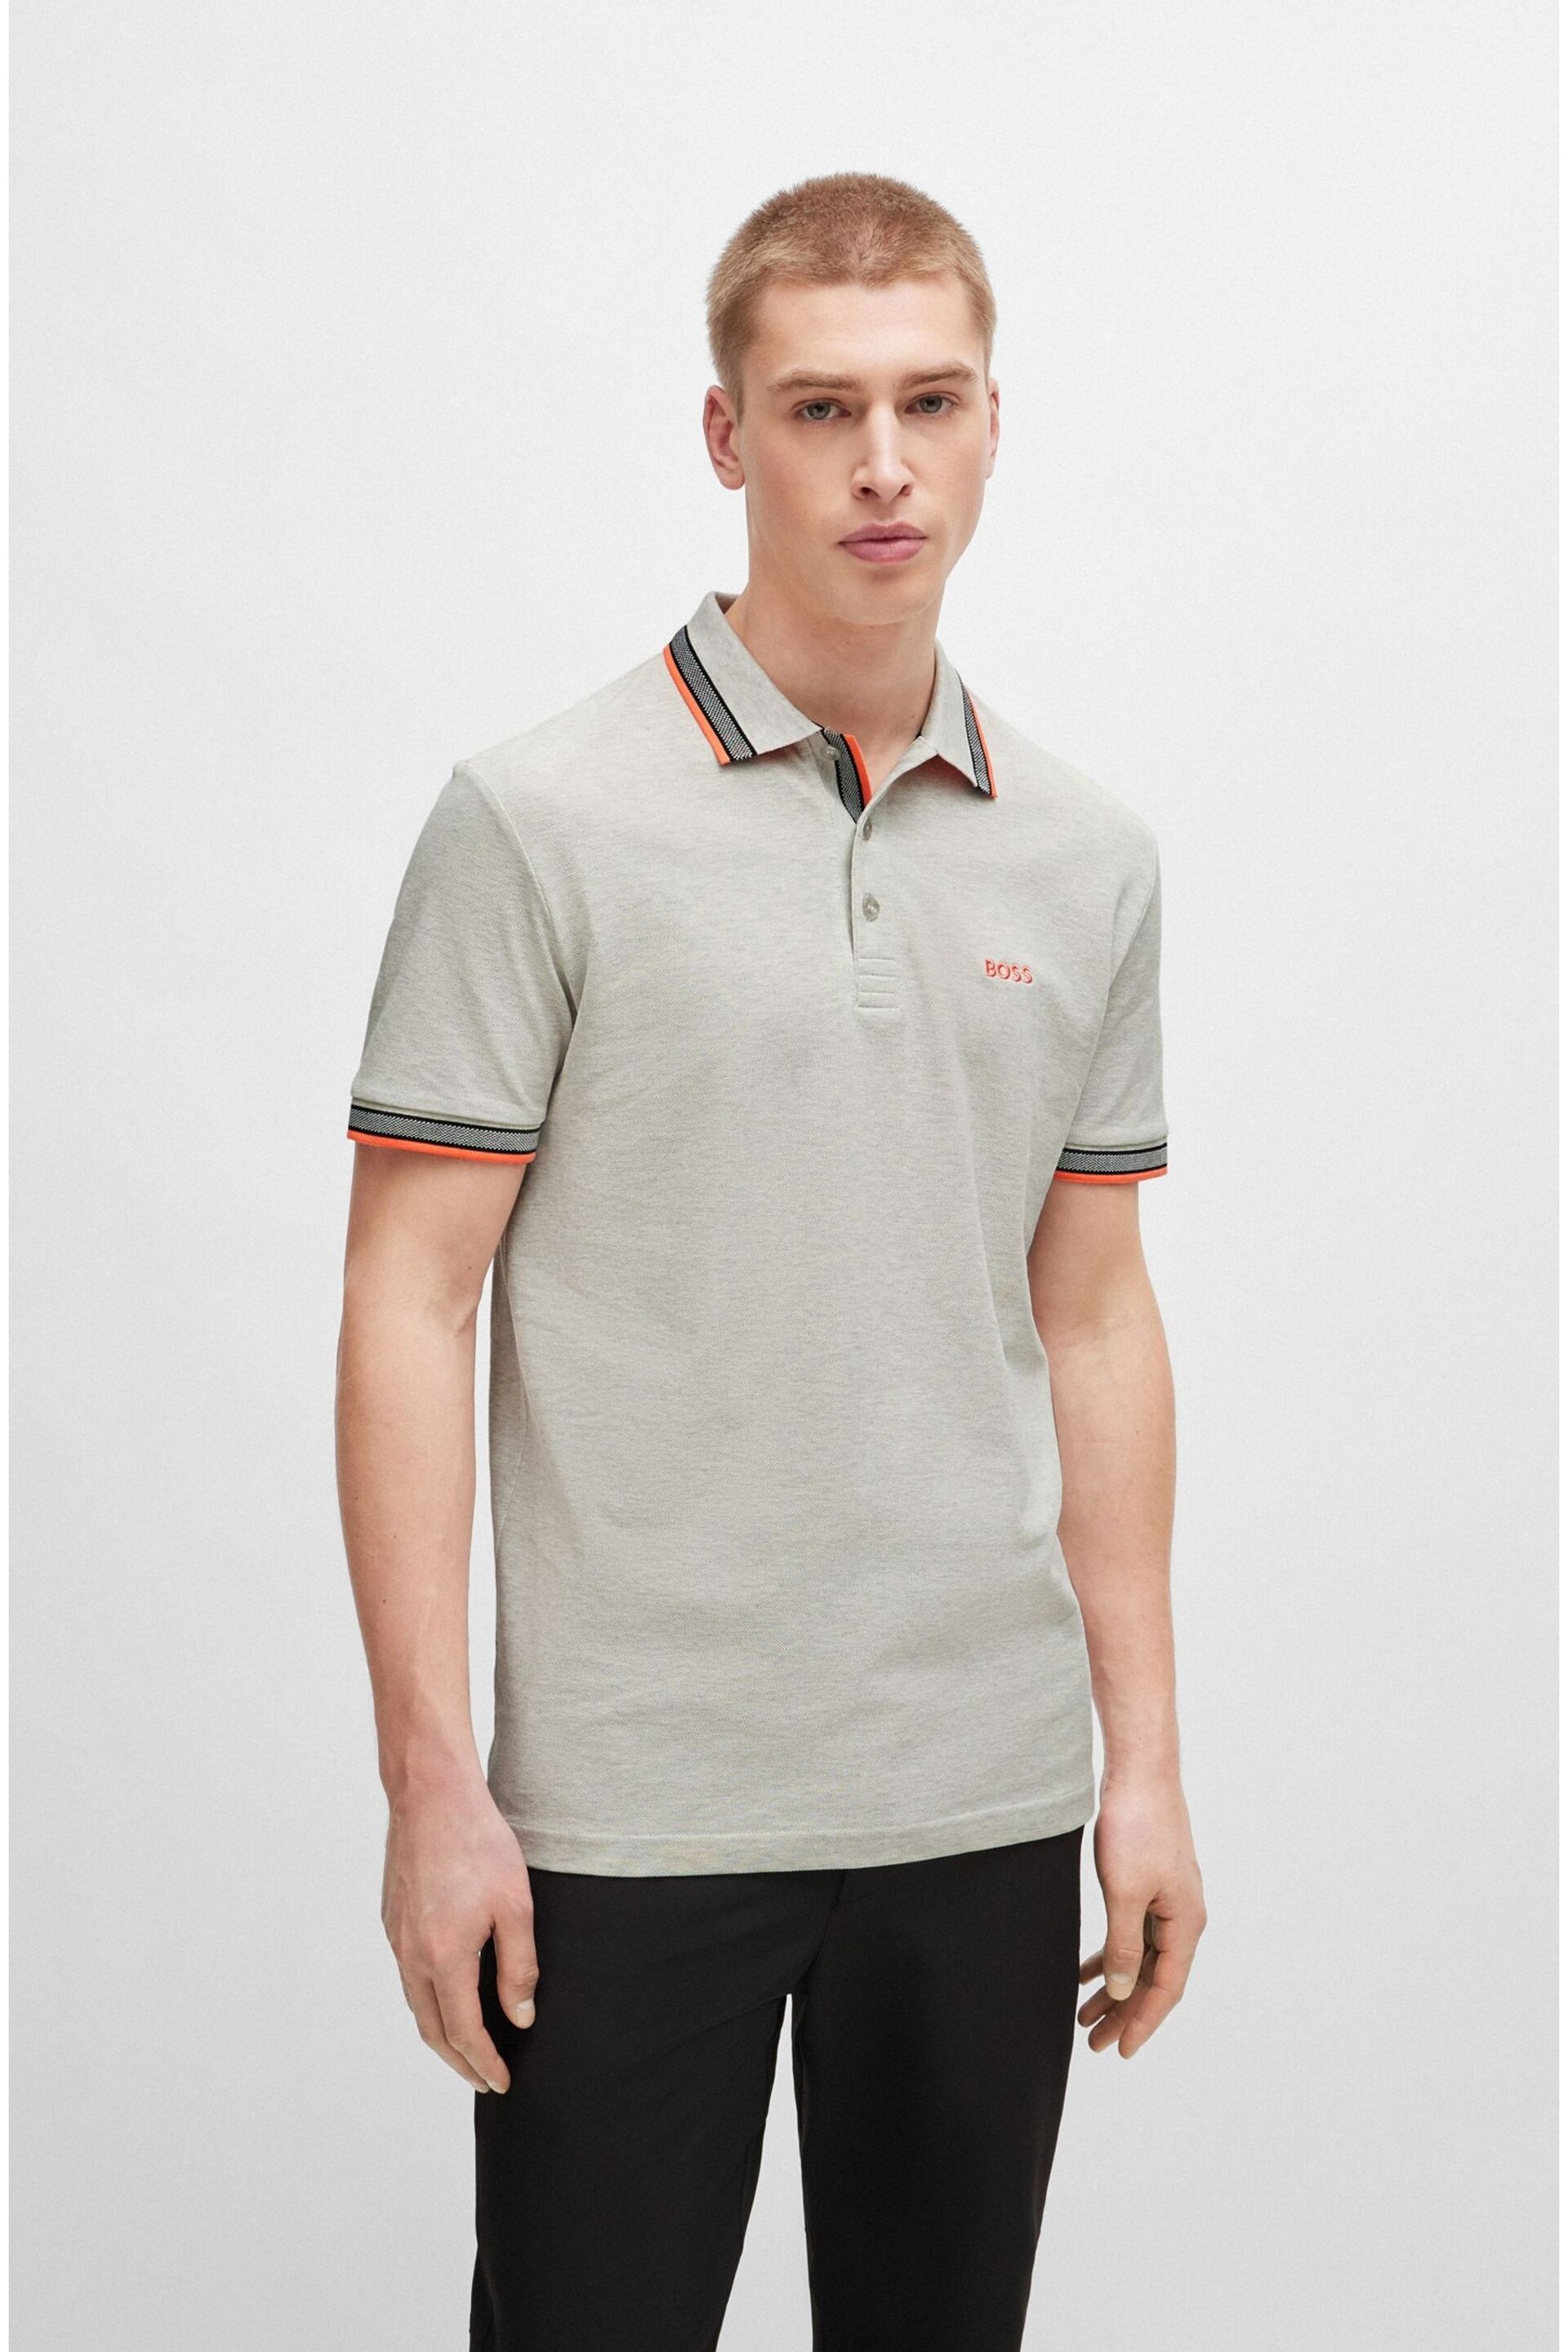 BOSS Light Grey Cotton Polo Shirt With Contrast Logo Details - Image 2 of 5